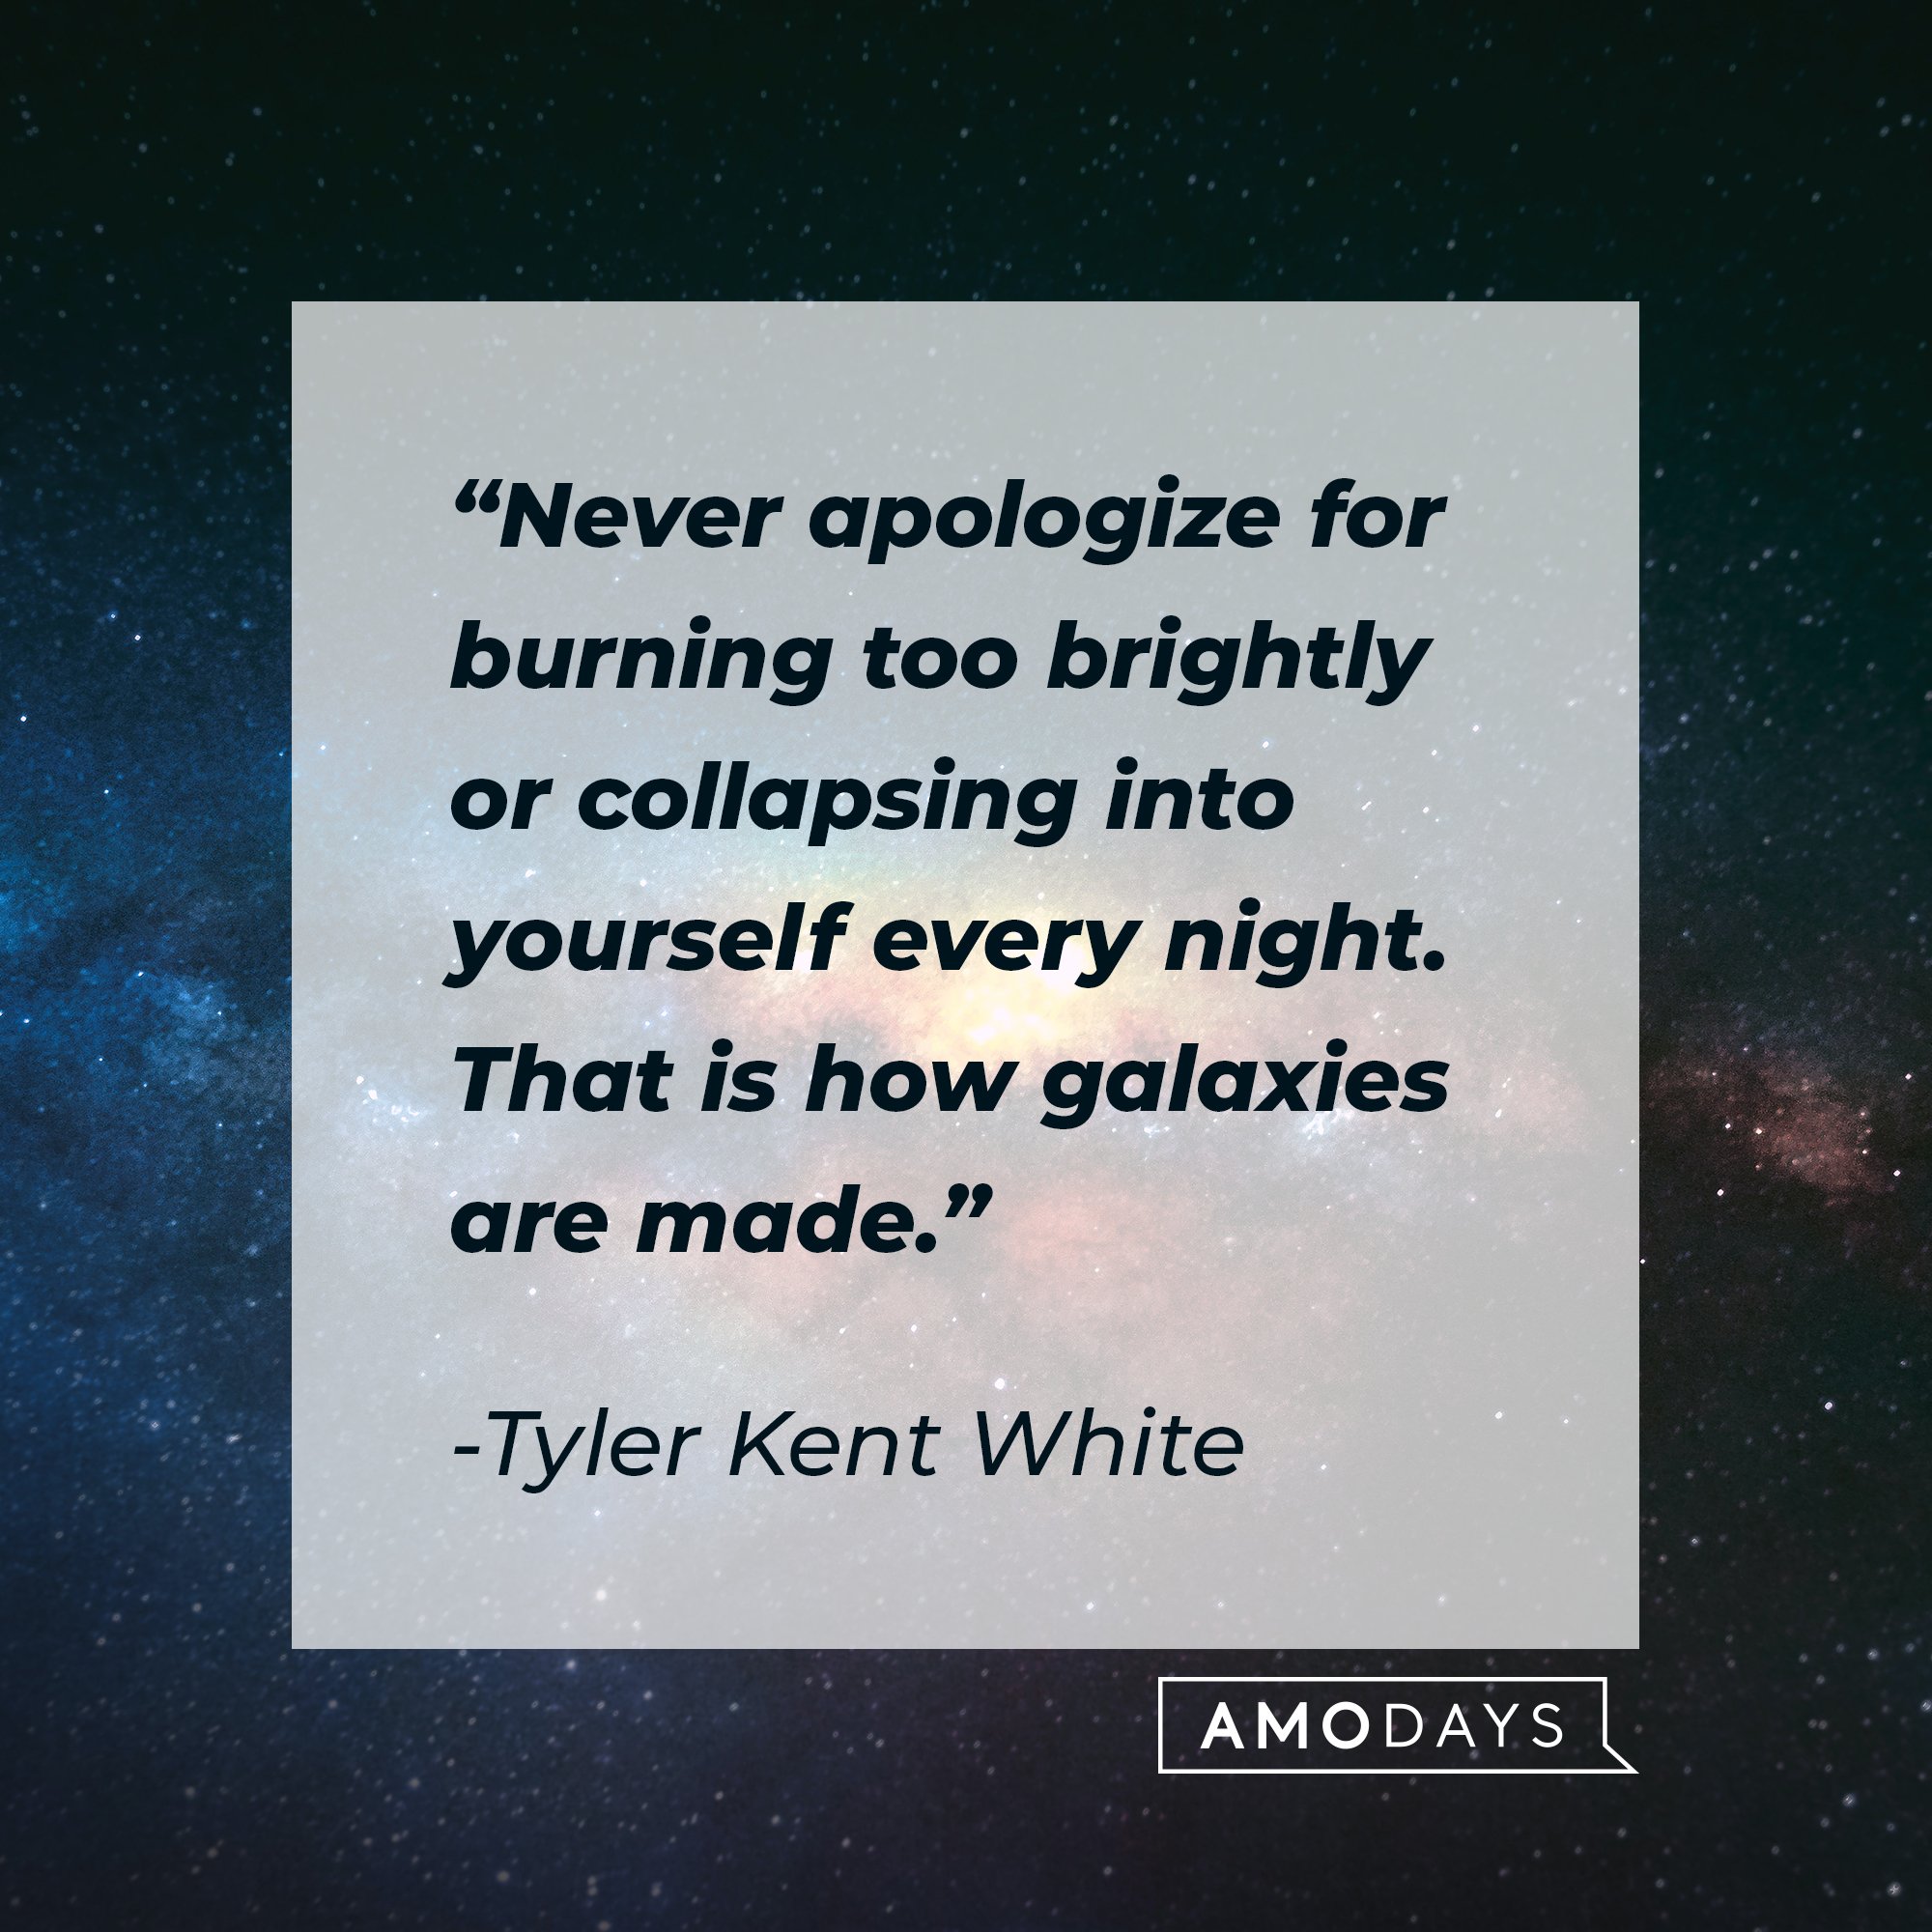 Tyler Kent White’s quote: "Never apologize for burning too brightly or collapsing into yourself every night. That is how galaxies are made." | Image: AmoDays